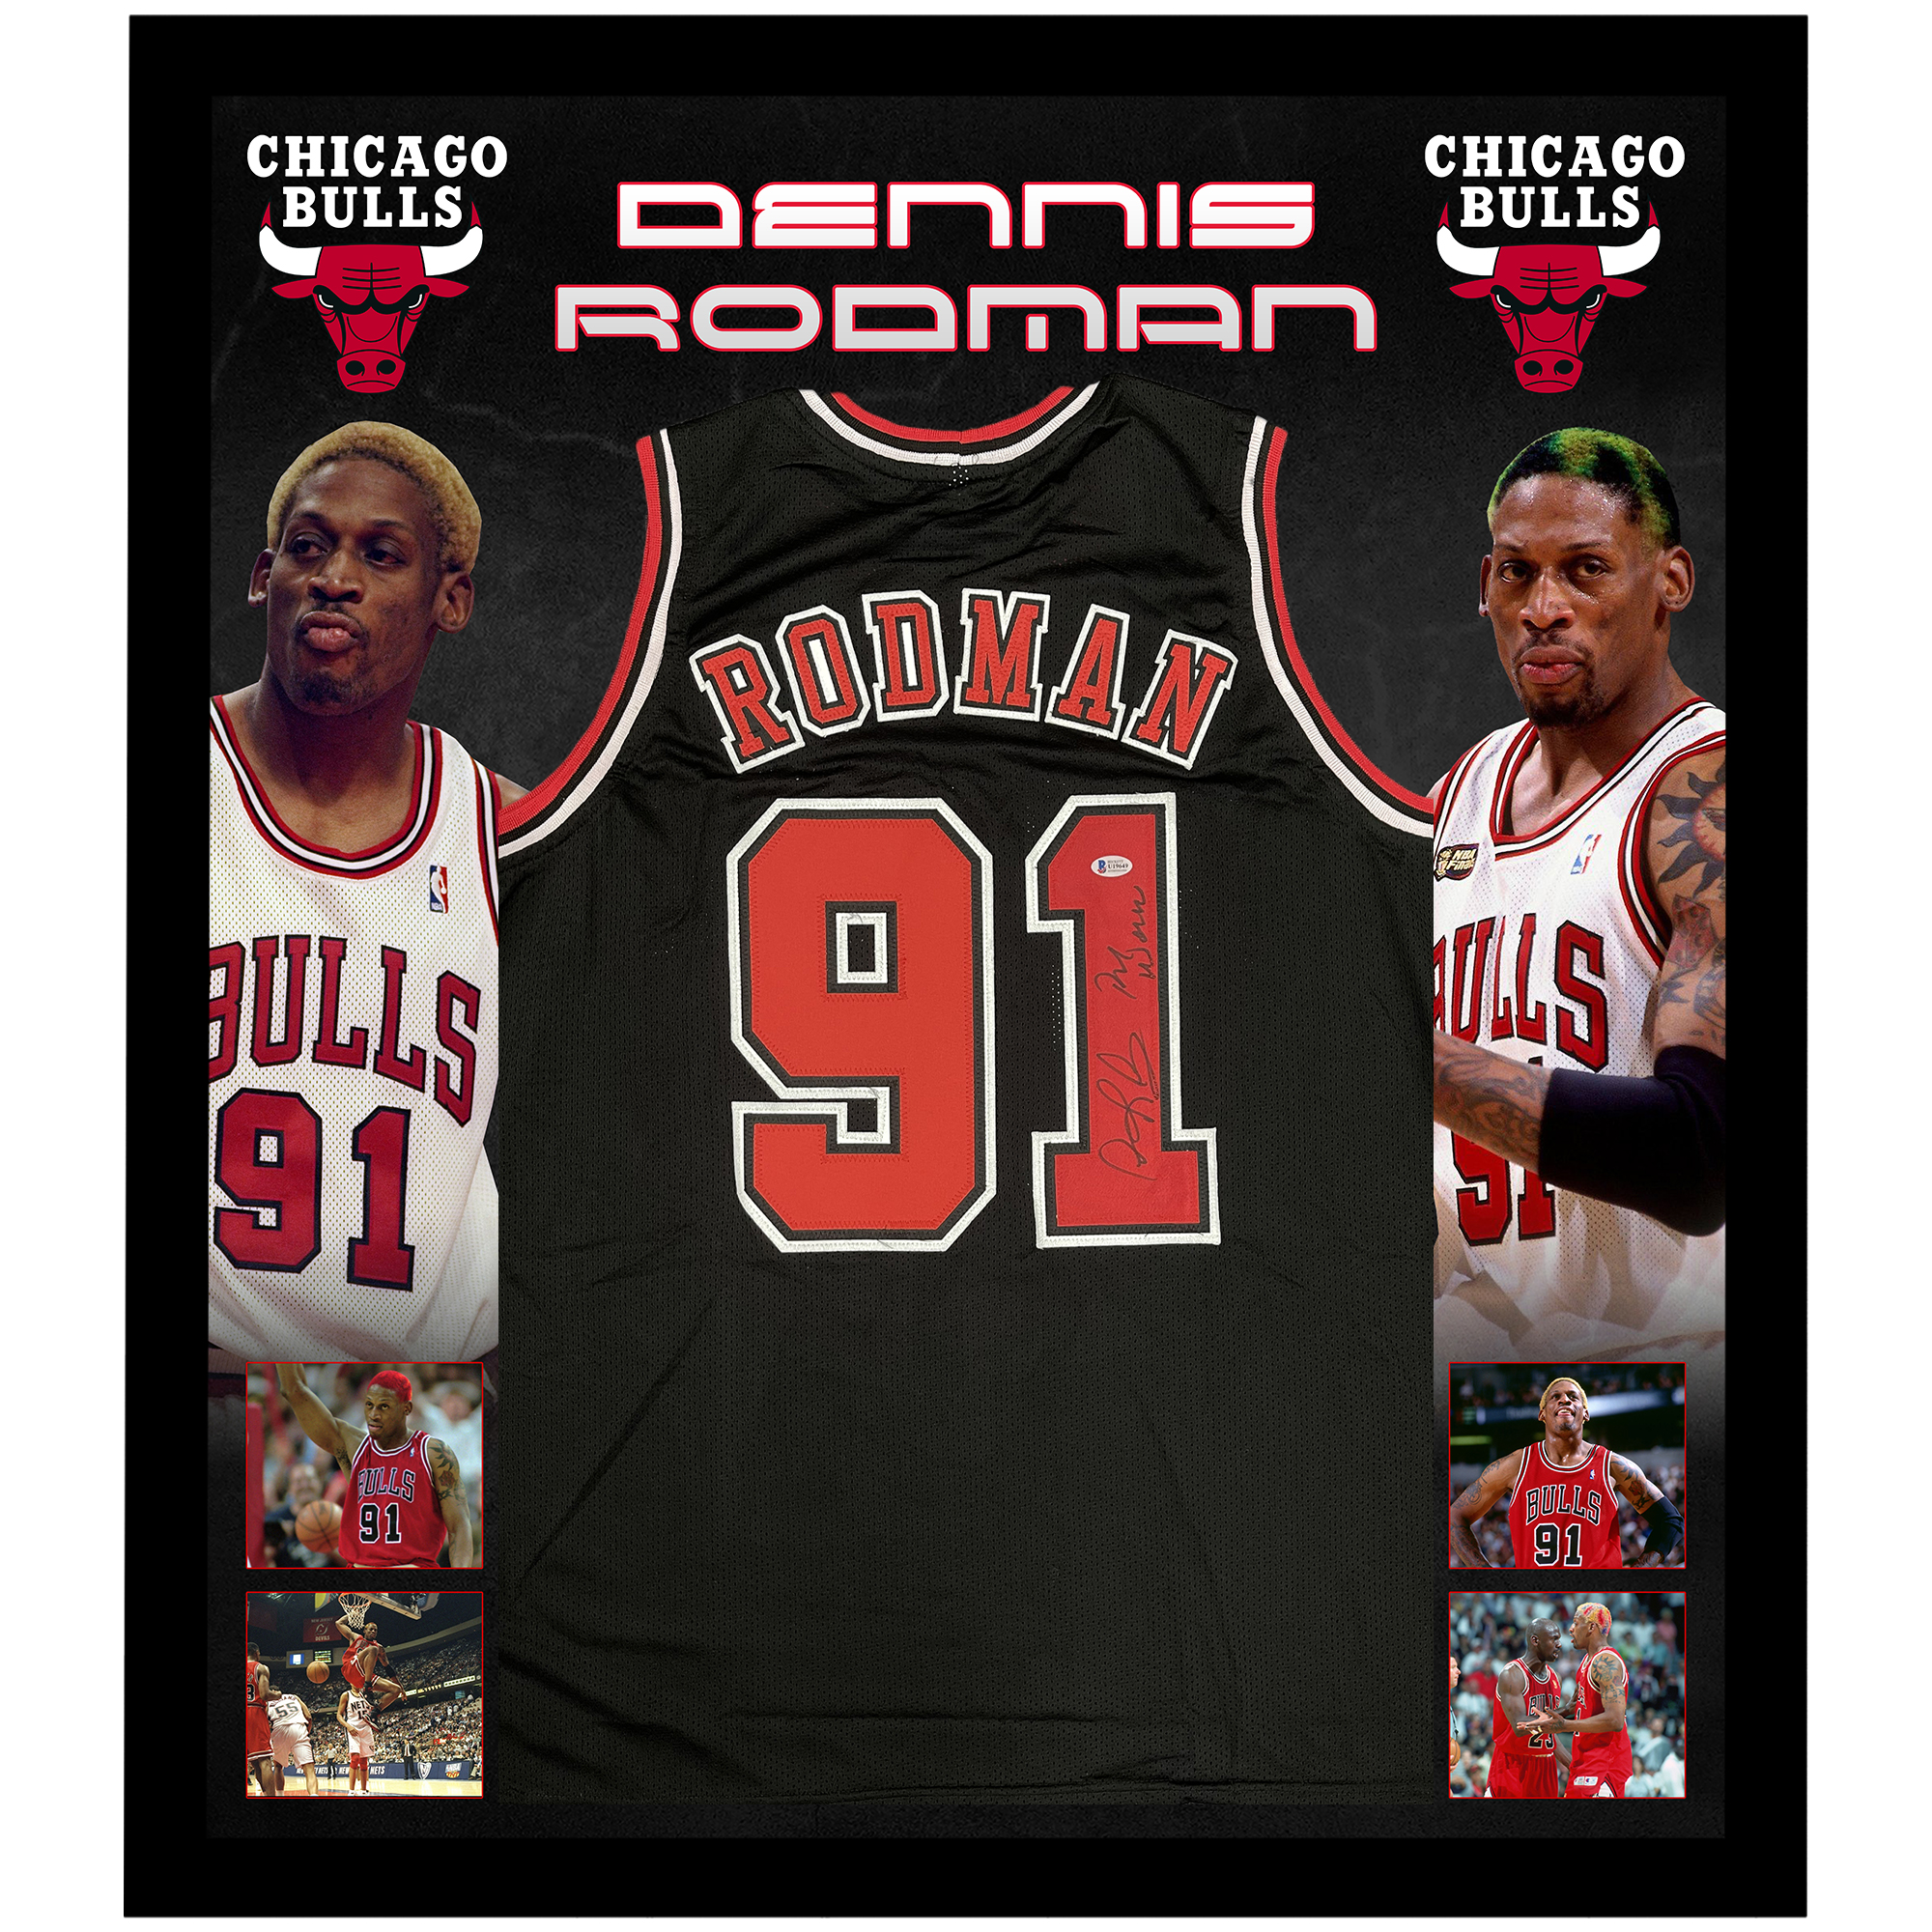 Dennis Rodman Signed Chicago Bulls Jersey - Beckett Authentication Services  BAS COA Authenticated - Professionally Framed & 2 8x10 Photo 34x42